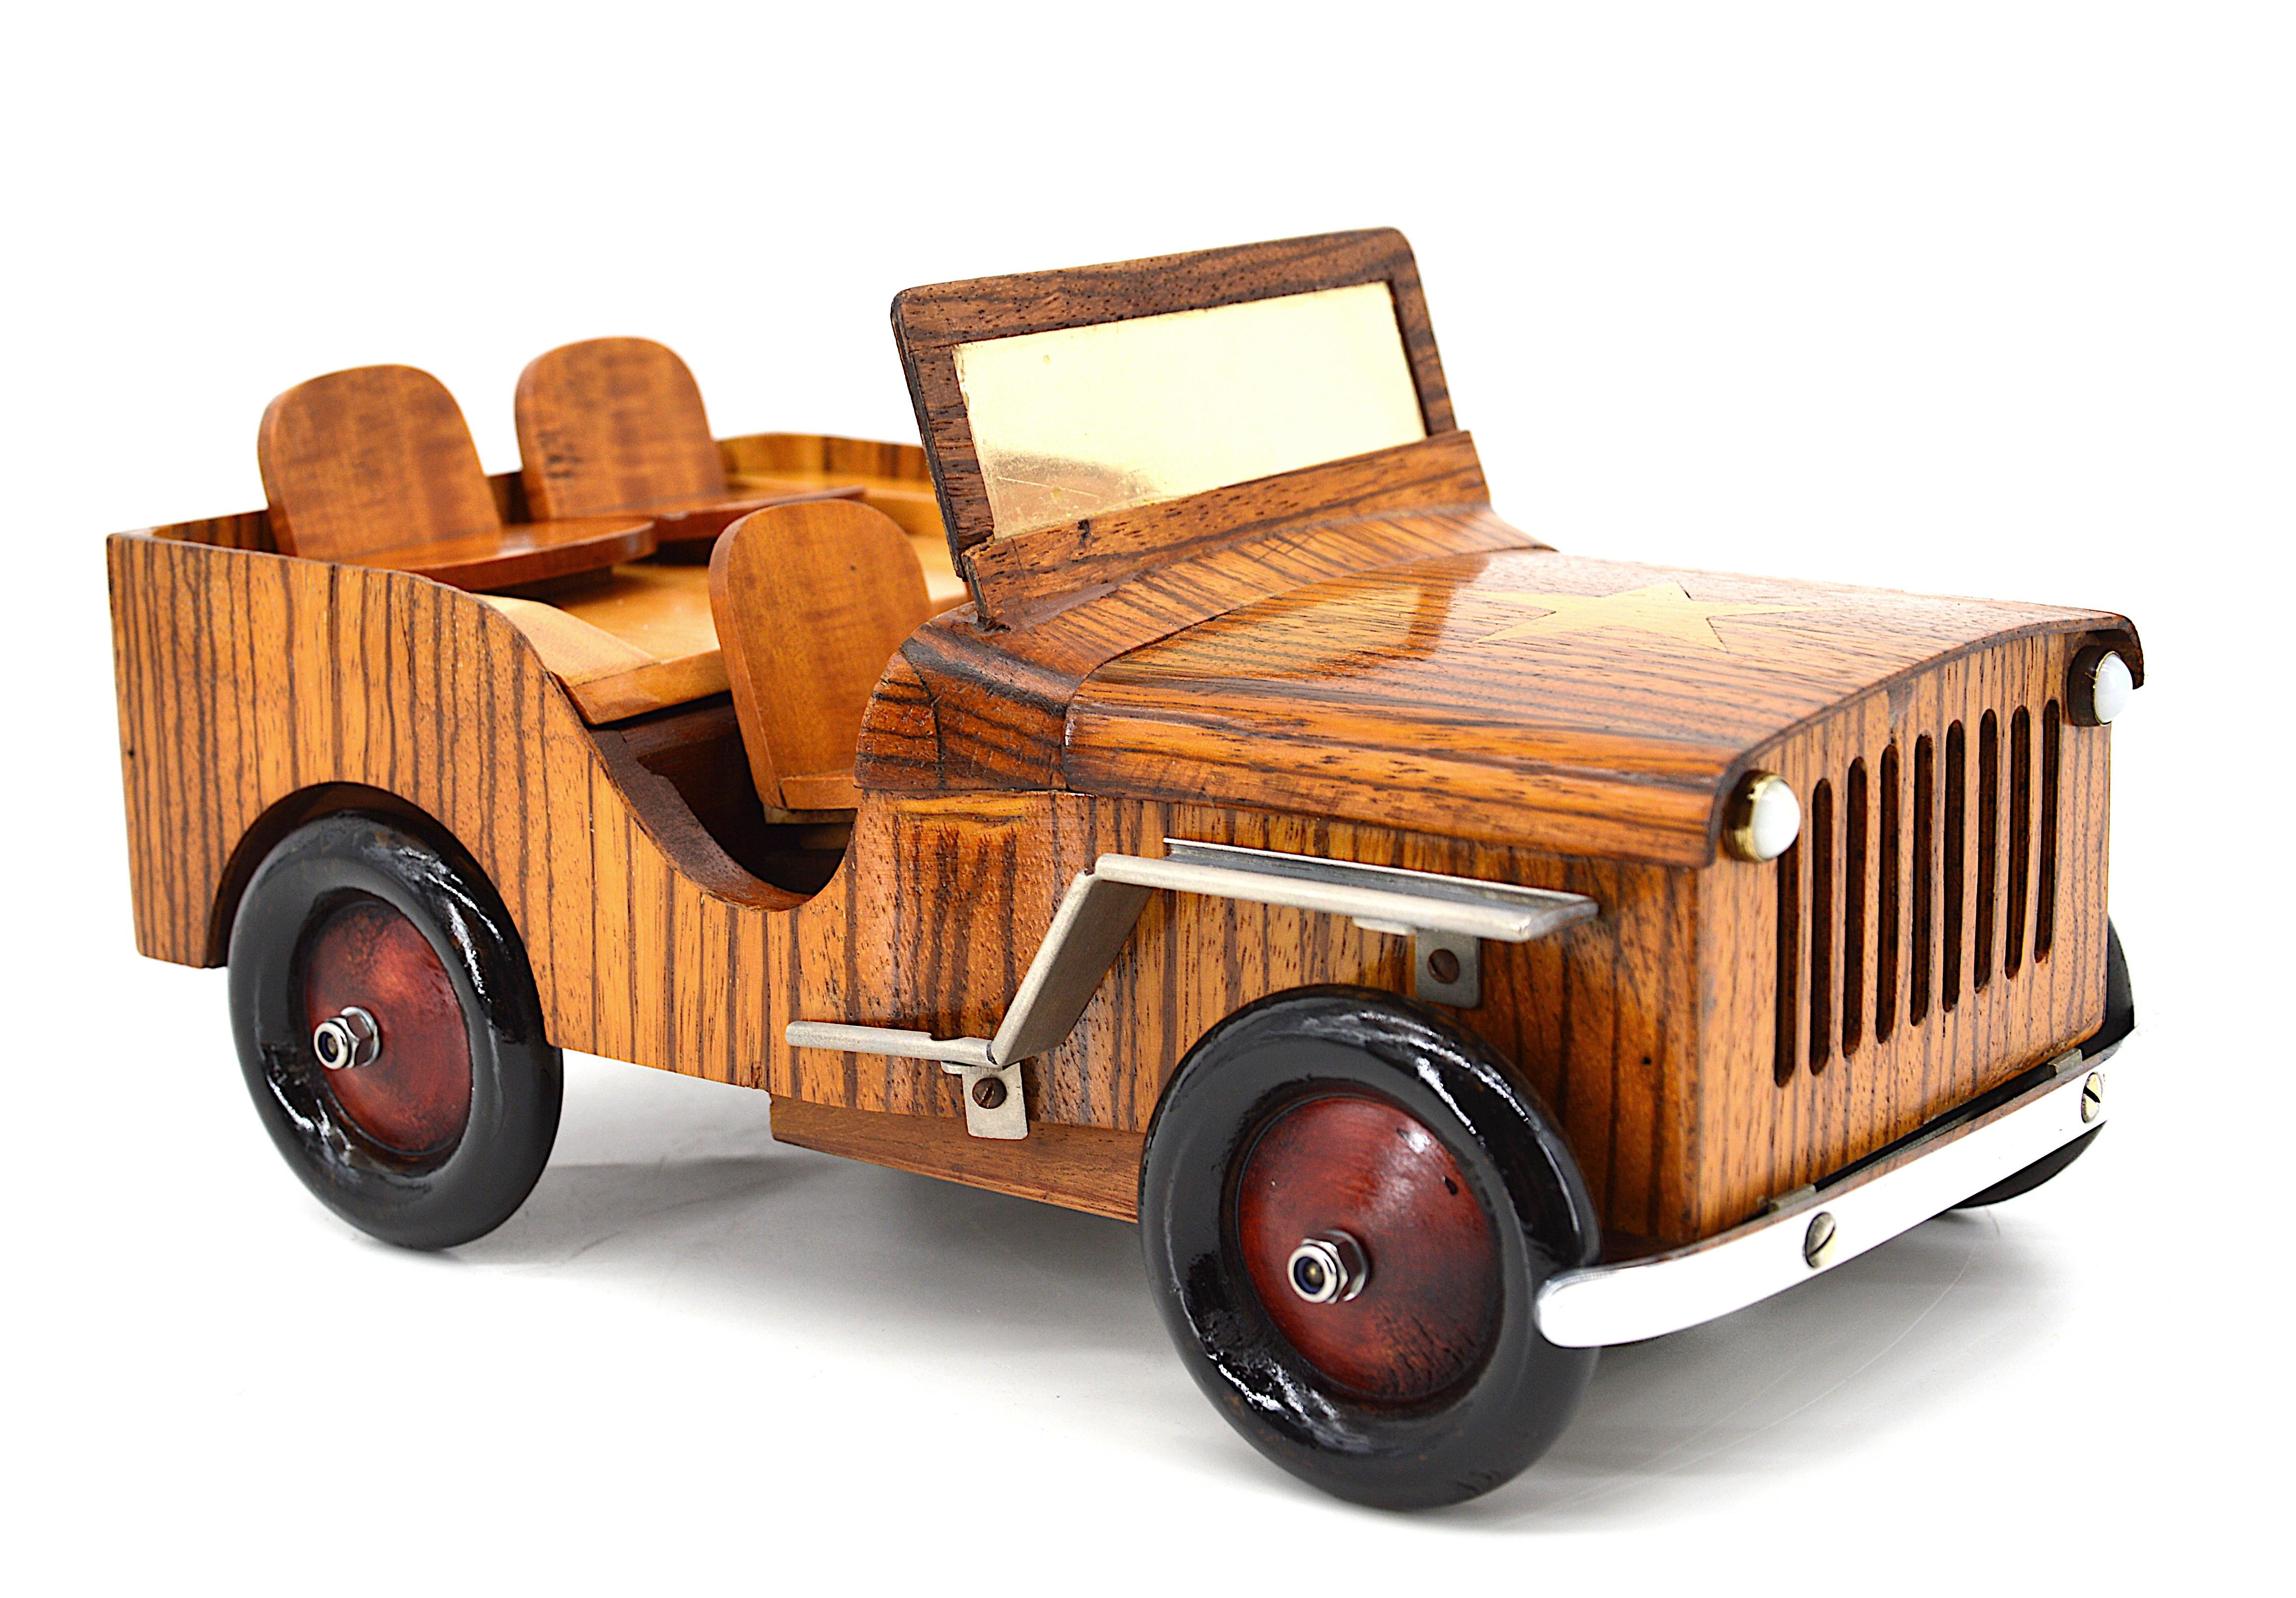 Midcentury cigarette set, France, Late 1940s. JEEP. Zebra wood, wood and metal. This car is a set for smoker including;

- A box of long cigarettes (back seats)
- A box of short cigarettes (front hood)
- Matchbox storage (front seats)
- Two